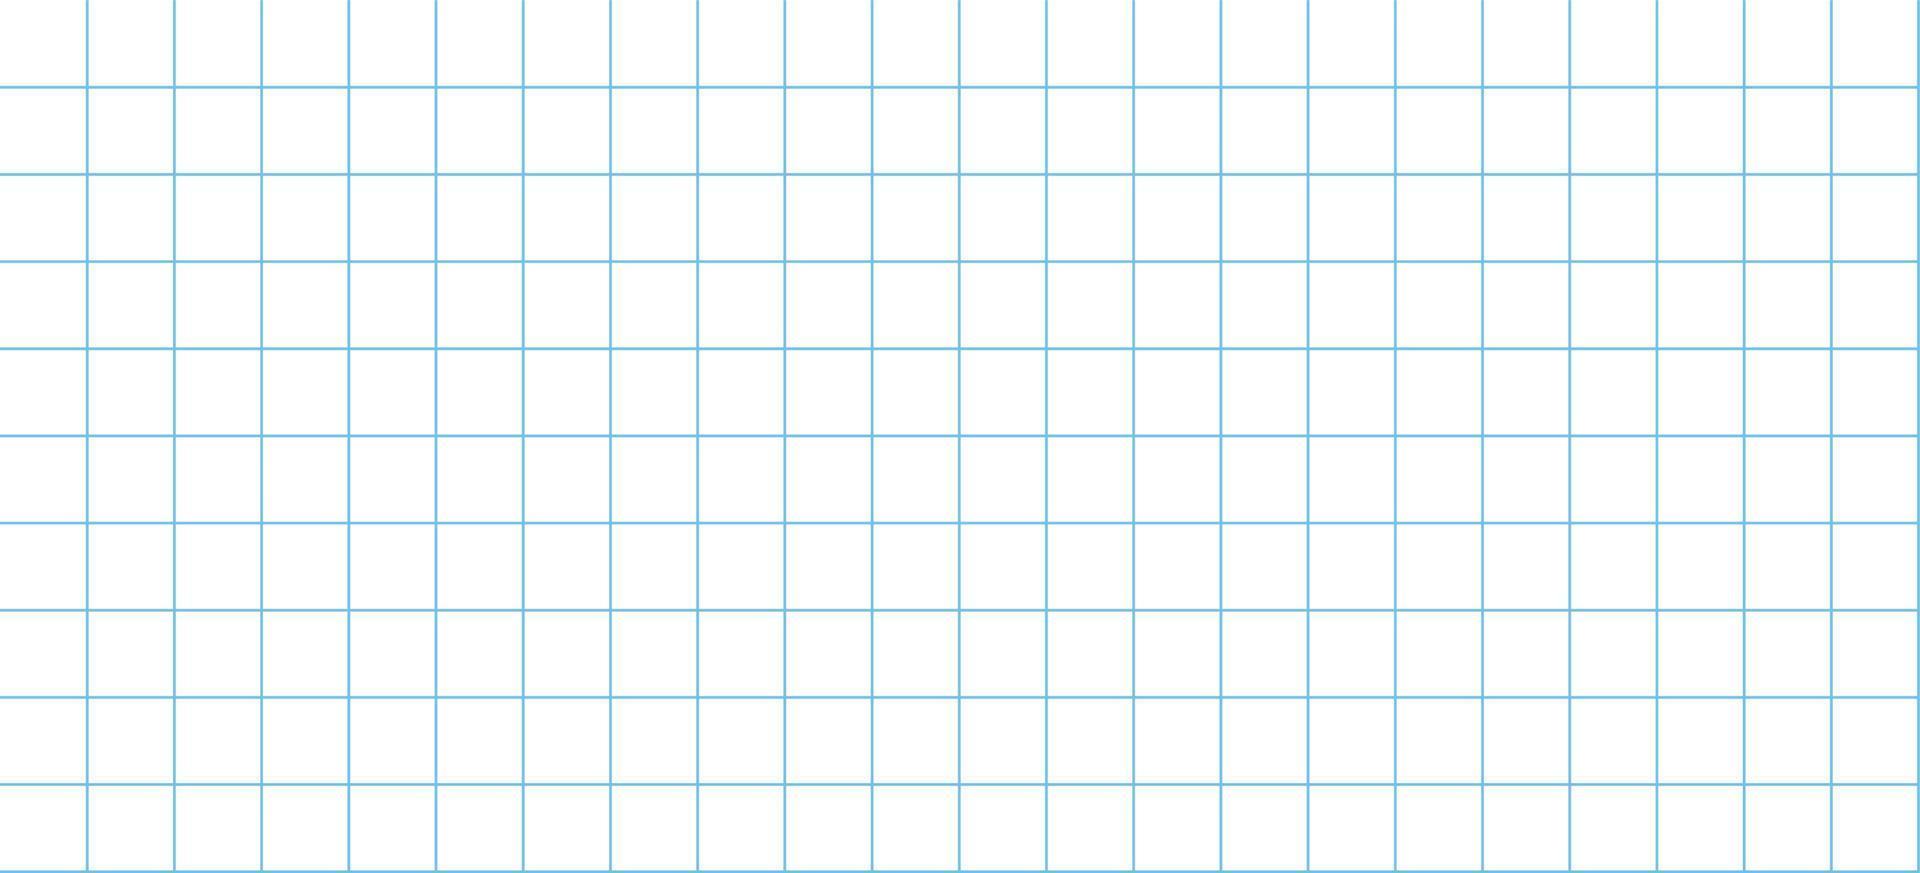 Blue graph paper grid background. Seamless pattern math paper texture. Desigh for rchitect plan, school project. Vector illustration